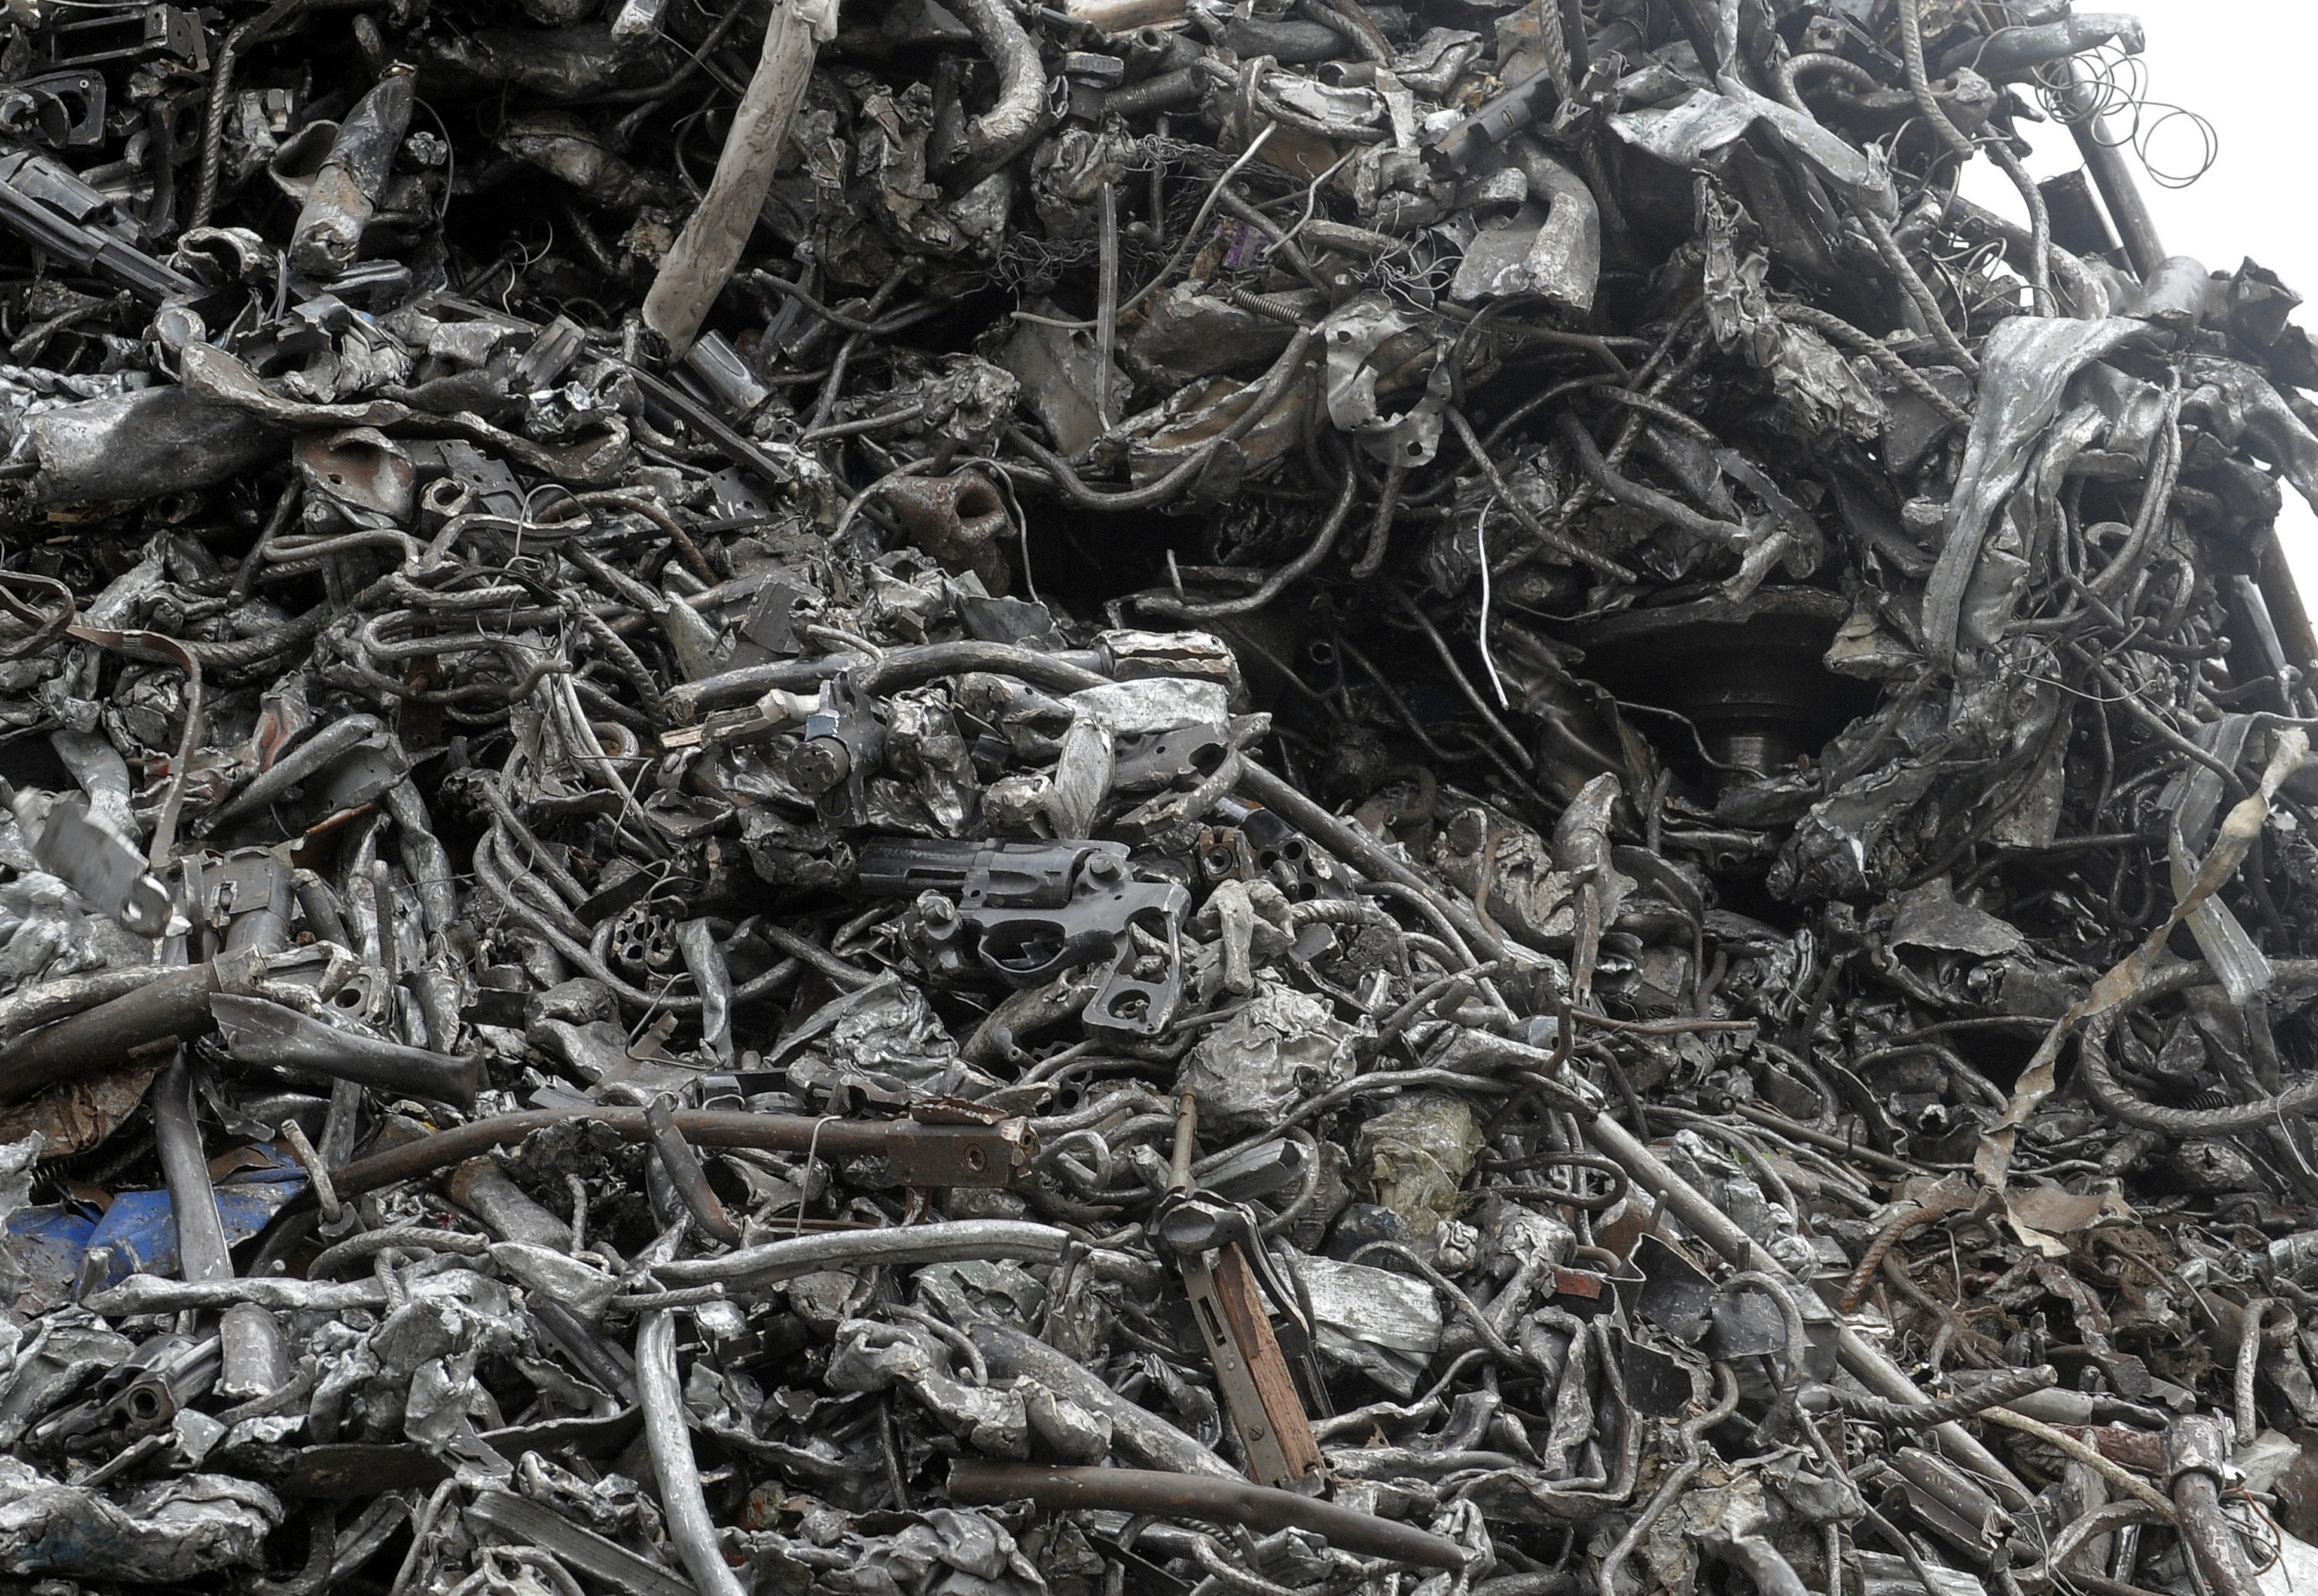 Metal scraps taken from weapons pile up in a landfill in France